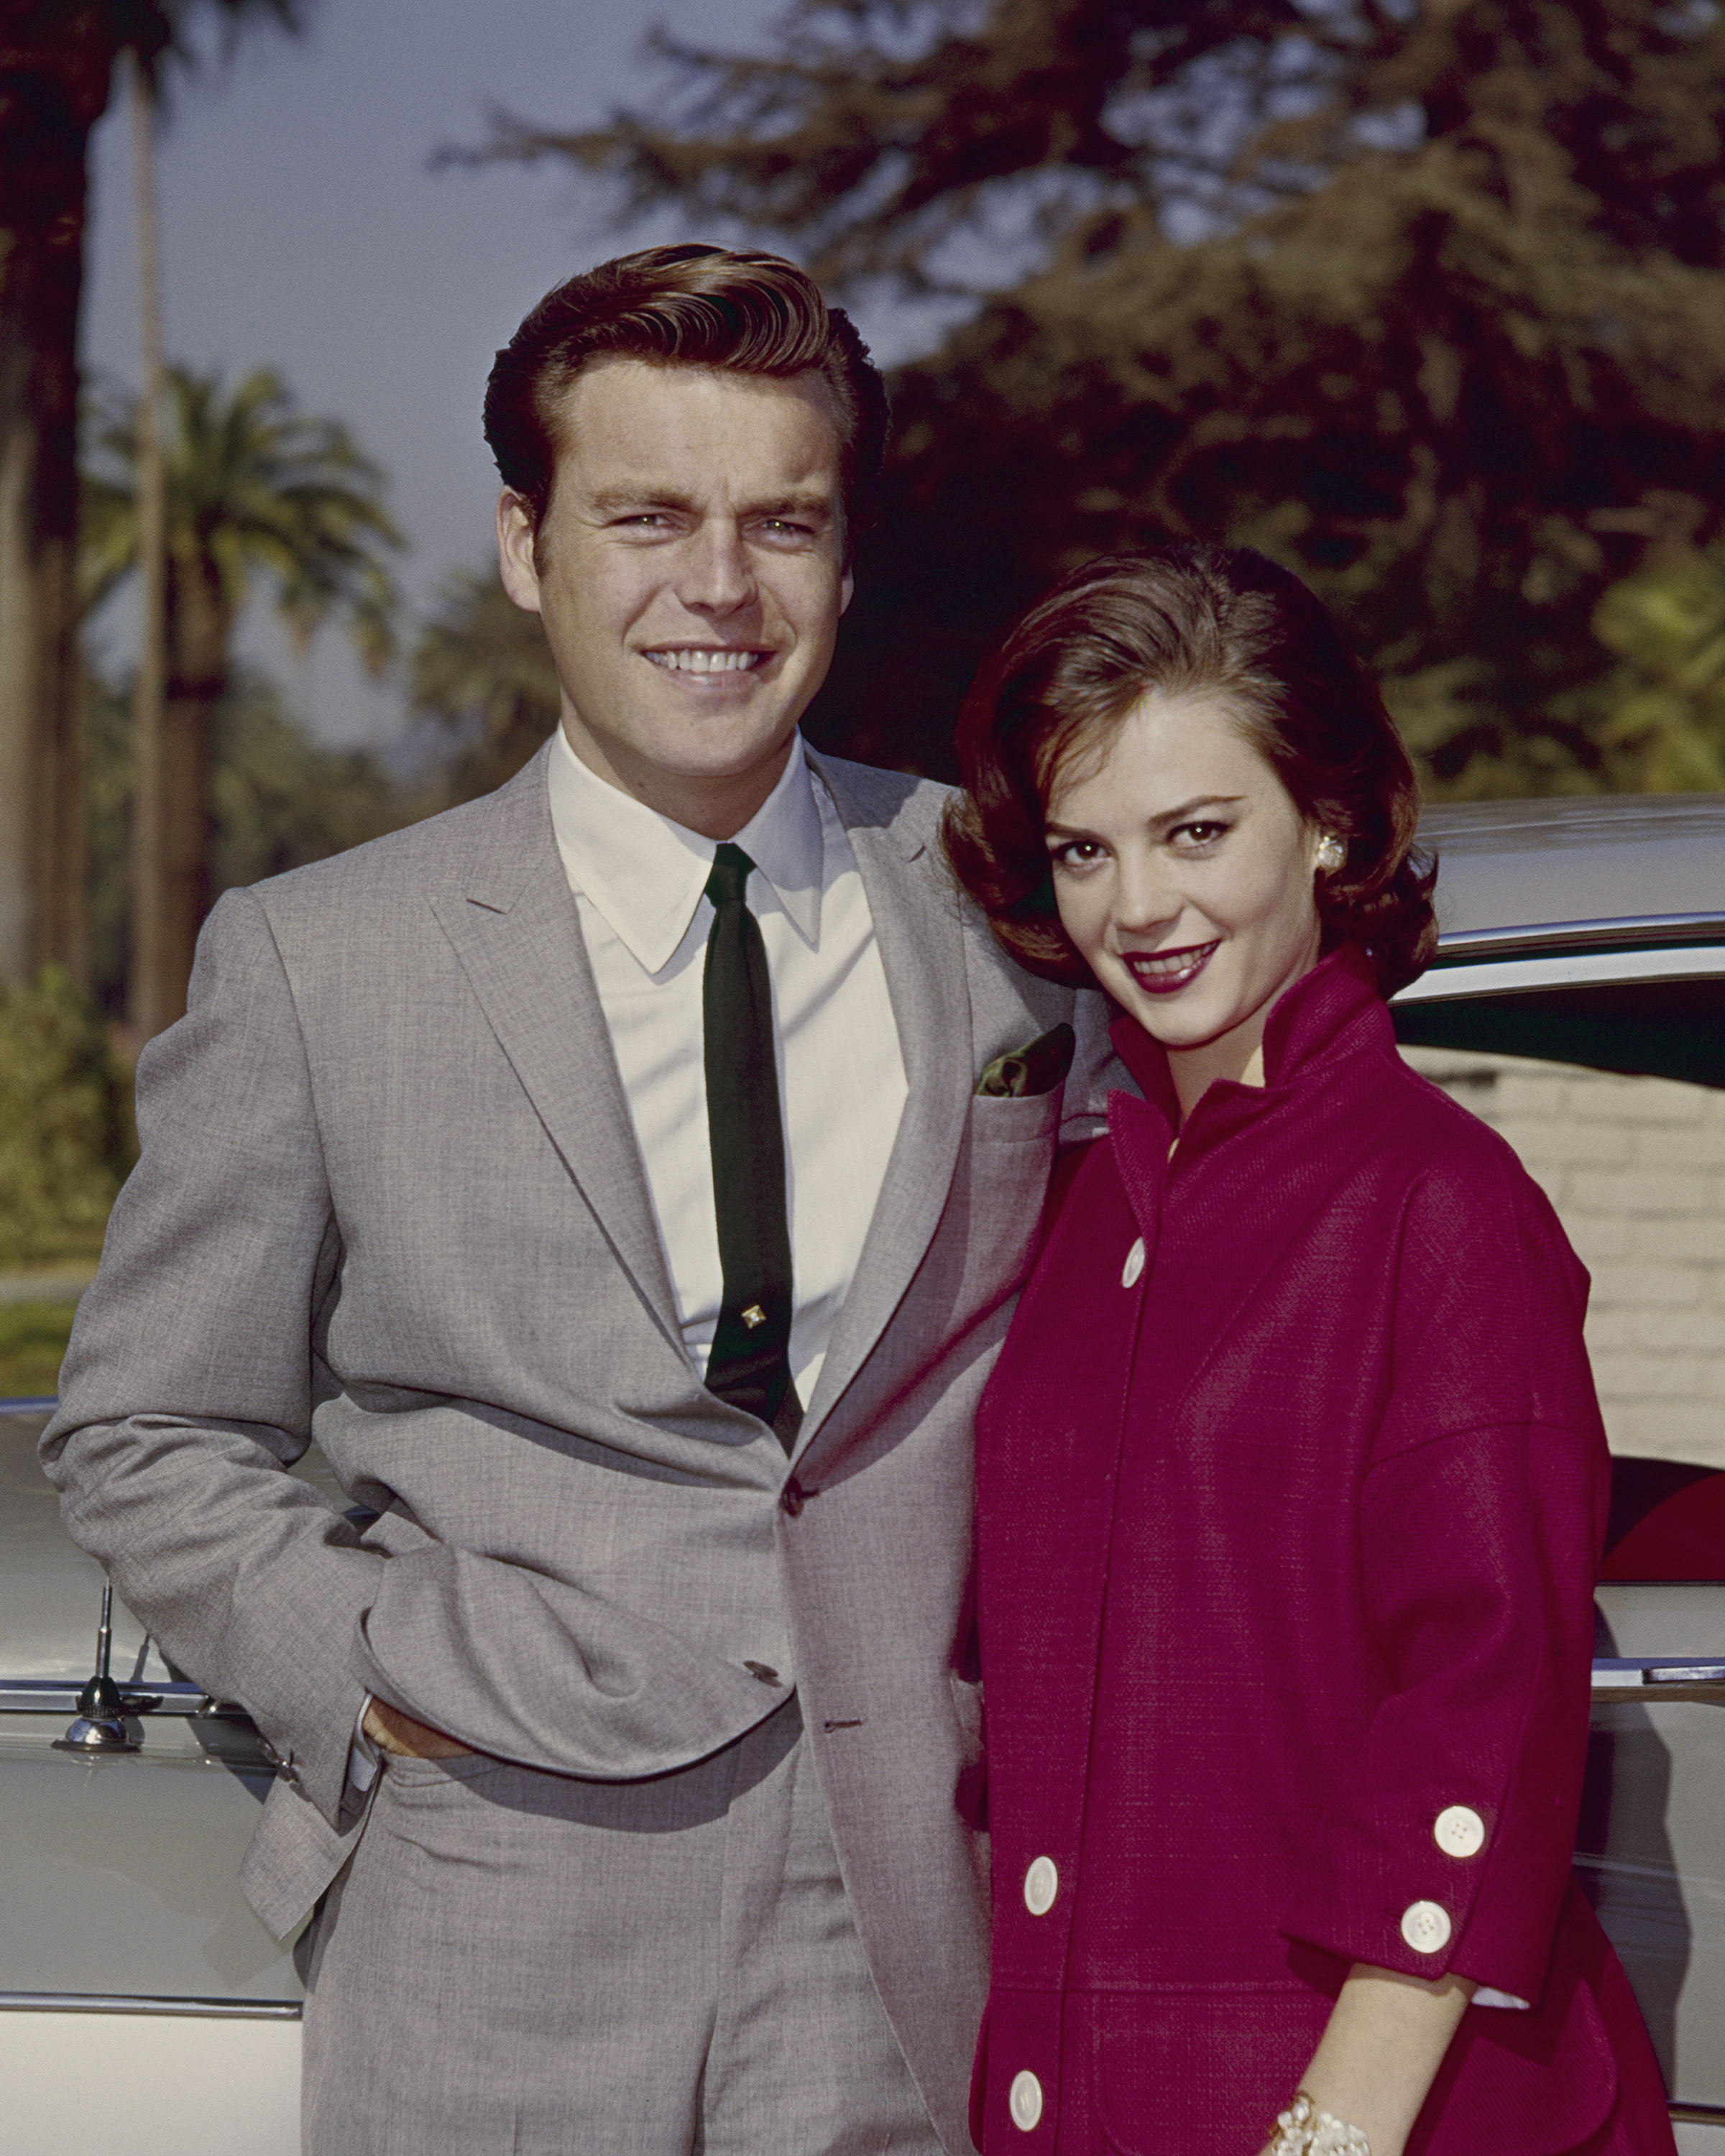 Natalie wood and Robert Wagner photographed in 1960 | Source: Getty Images